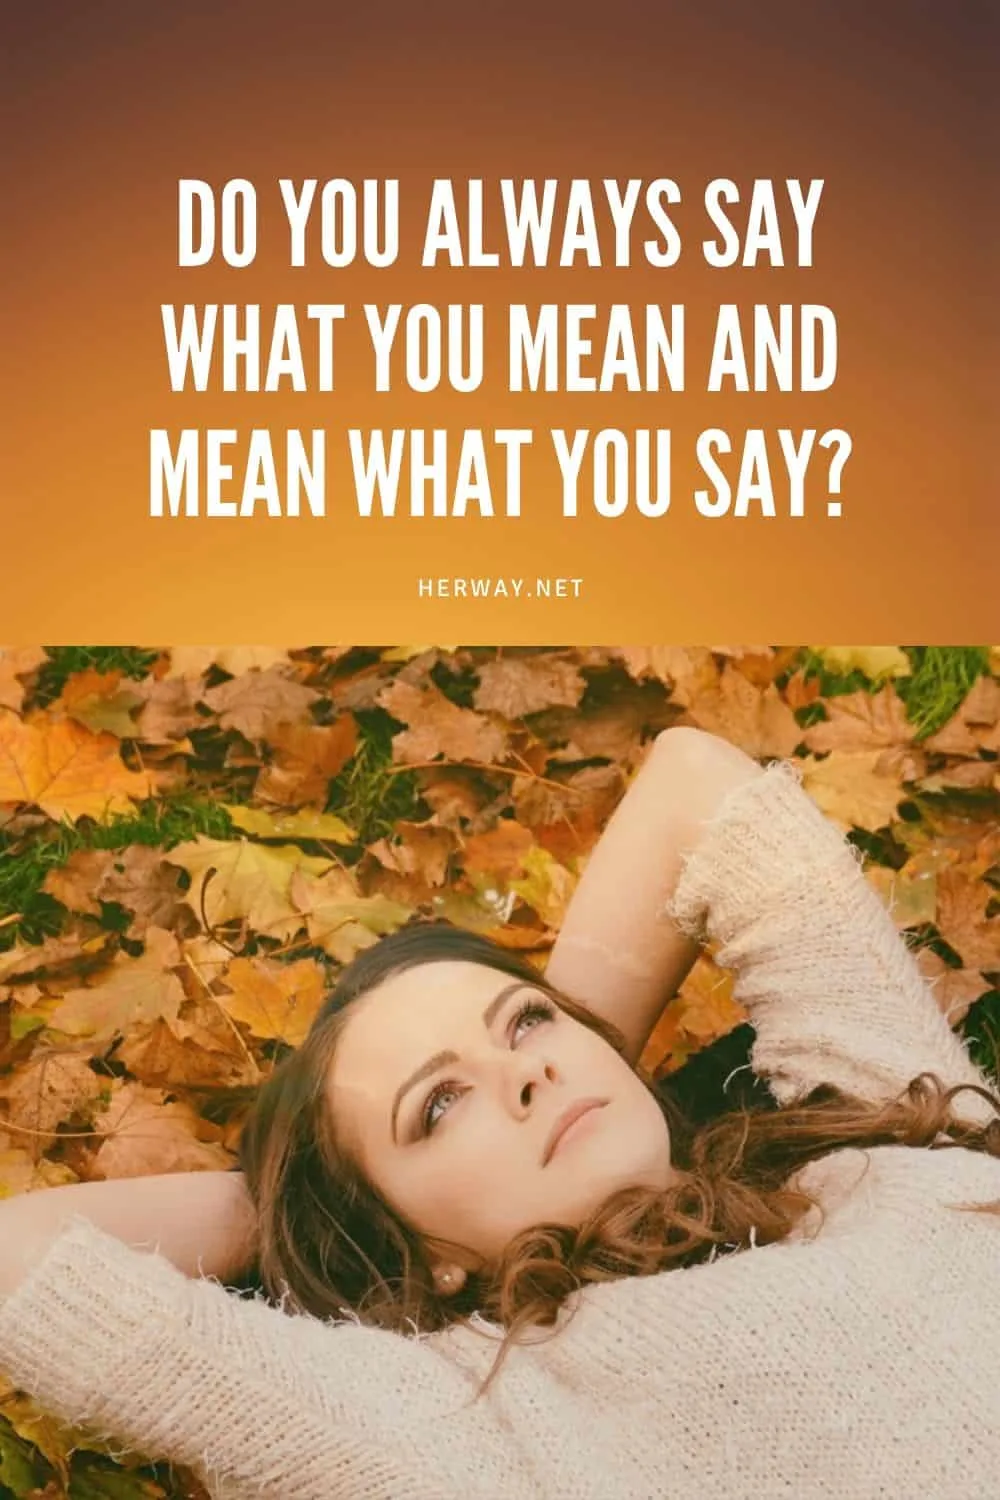 Do You Always Say What You Mean And Mean What You Say?